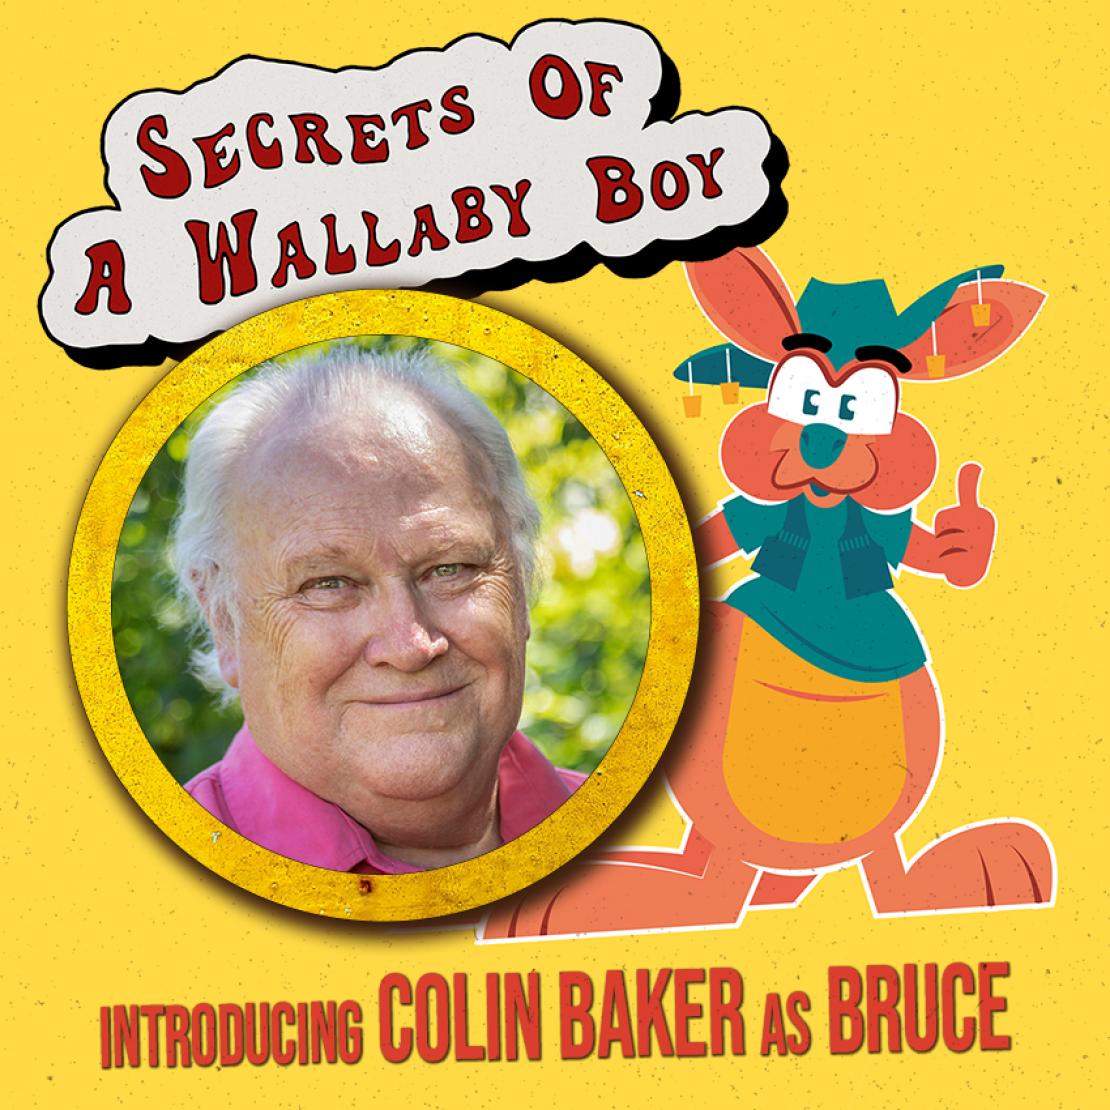 Colin Baker and Bruce the wallaby